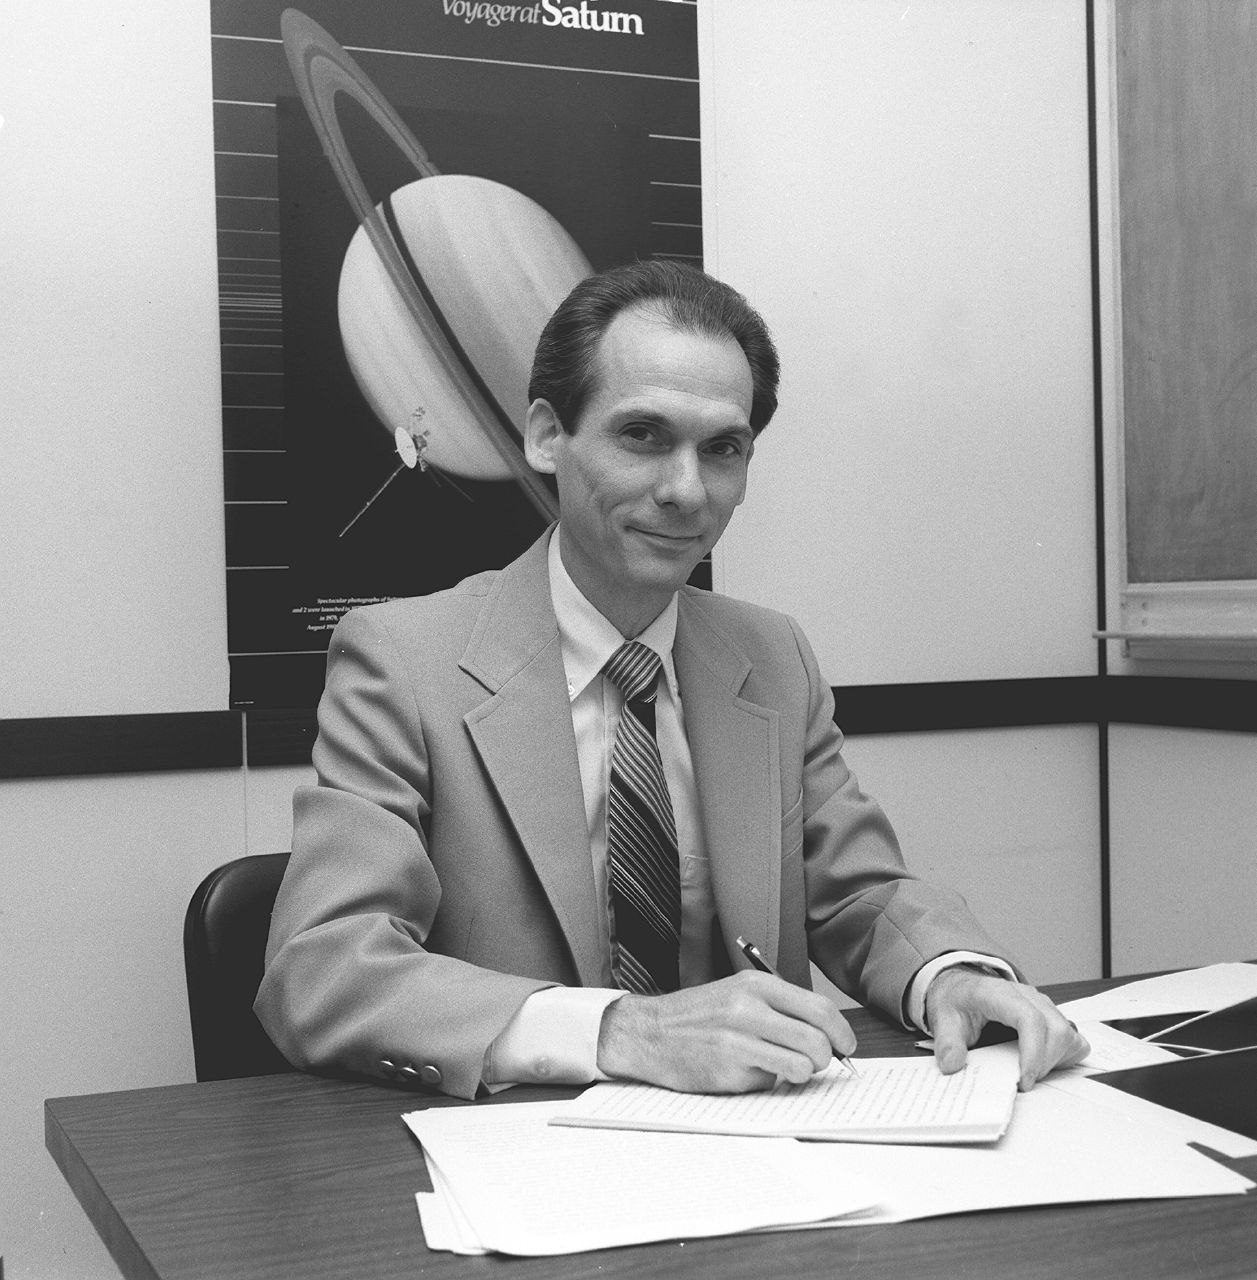 Ed Stone became project scientist for the Voyager mission in 1972, five years before launch, and served in the role for a total of 50 years. During that time, he also served as director of NASA’s Jet Propulsion Laboratory, which manages the Voyager mission for the agency.